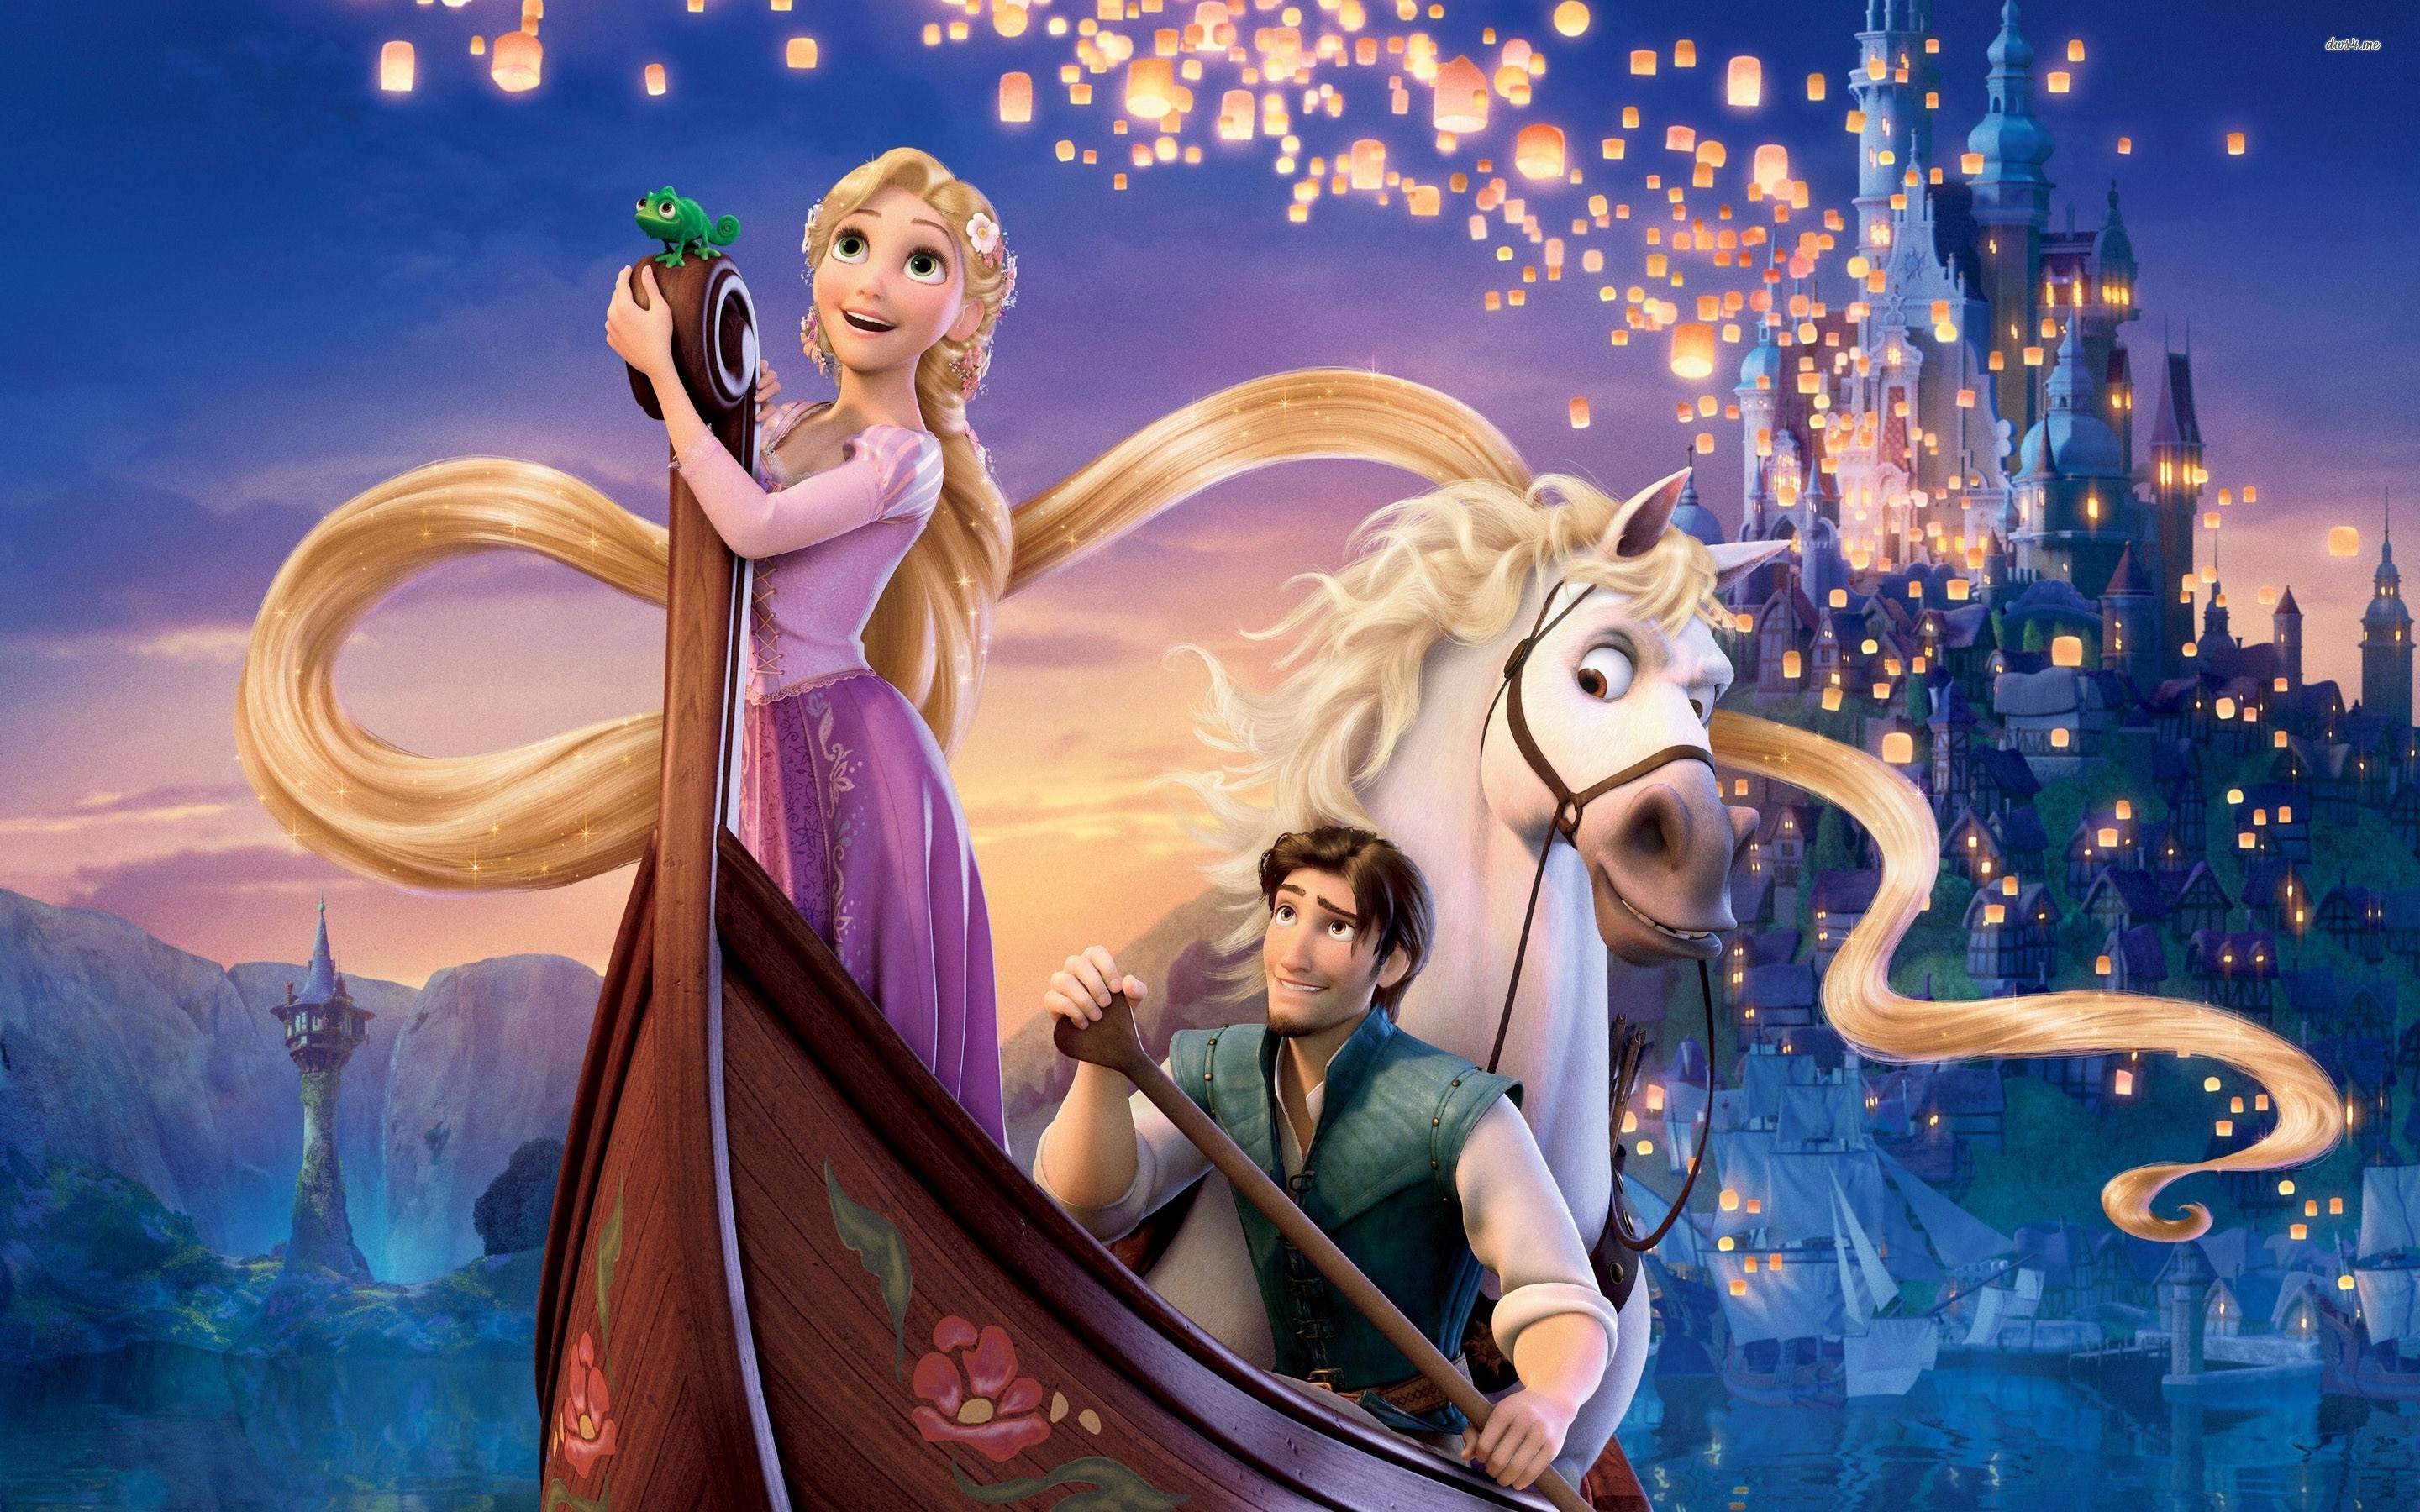 Tangled Wallpapers, Free Desktop Backgrounds - Wallpaper Path